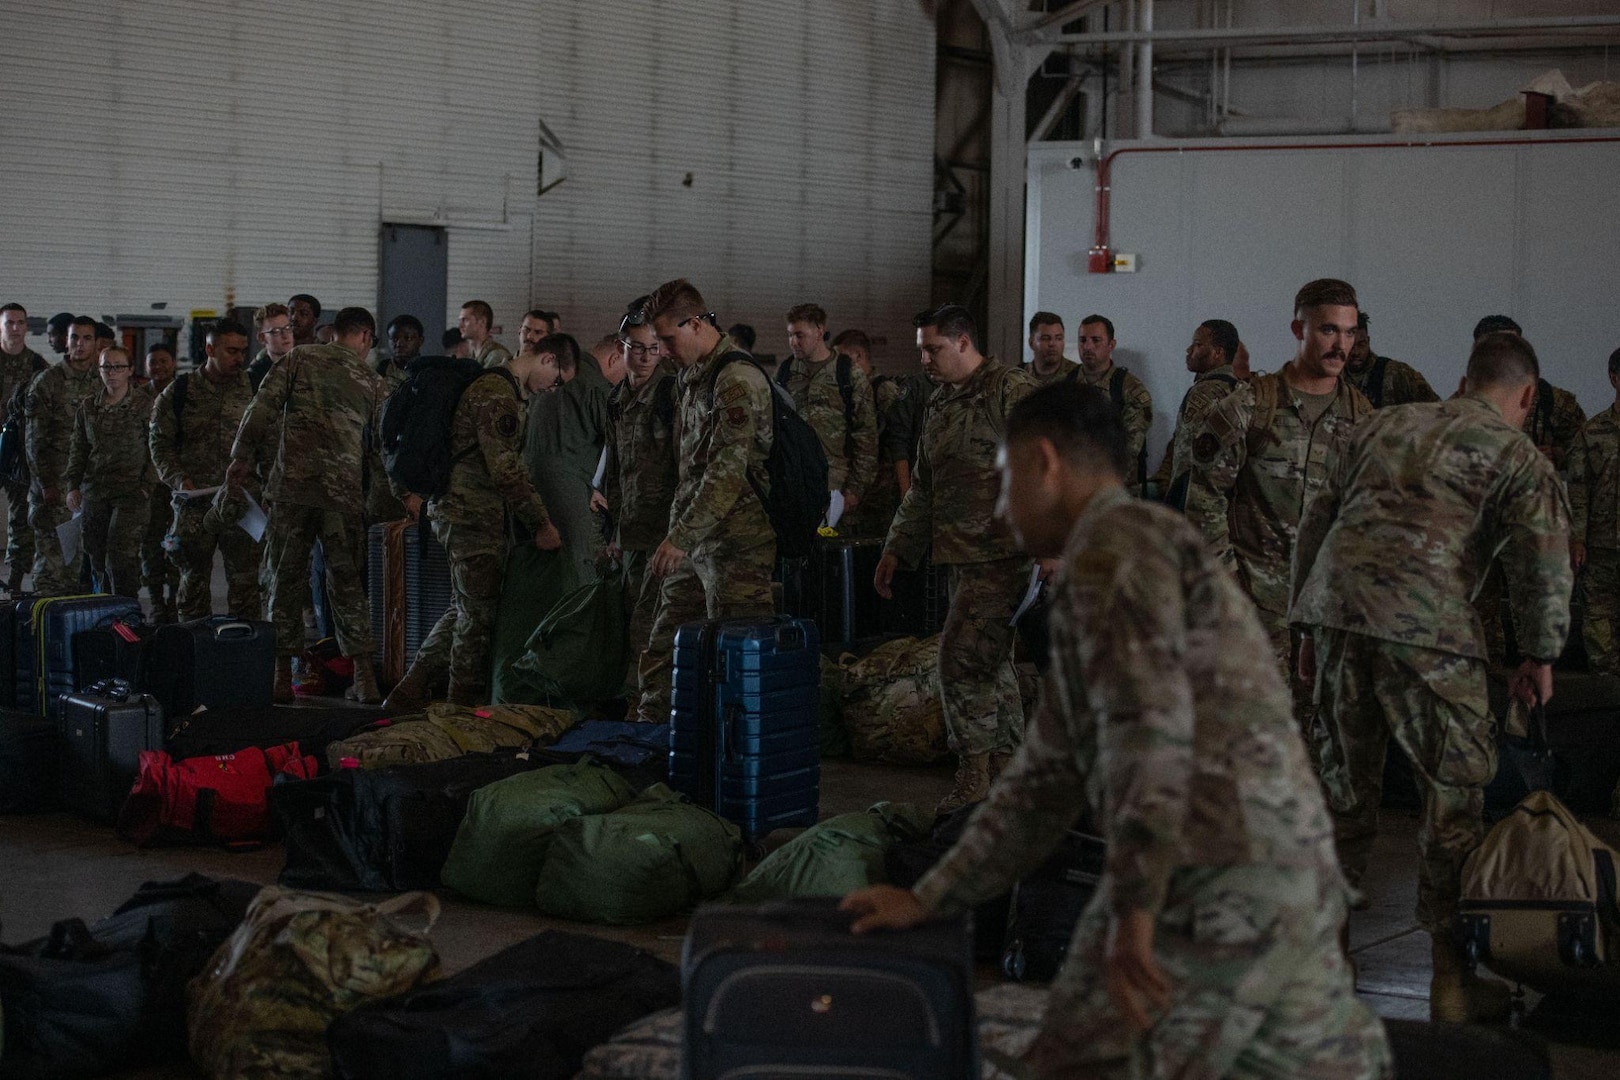 Airmen assigned to the 5th Bomb Wing
collect their luggage upon returning from
a Bomber Task Force mission at Minot Air
Force Base, North Dakota, July 24, 2023.
U.S. Strategic Command BTF missions
provide opportunities to train and work
with allies and partners in joint and
coalition operations and exercises. (U.S.
Air Force photo by Airman 1st Class Trust
Tate)